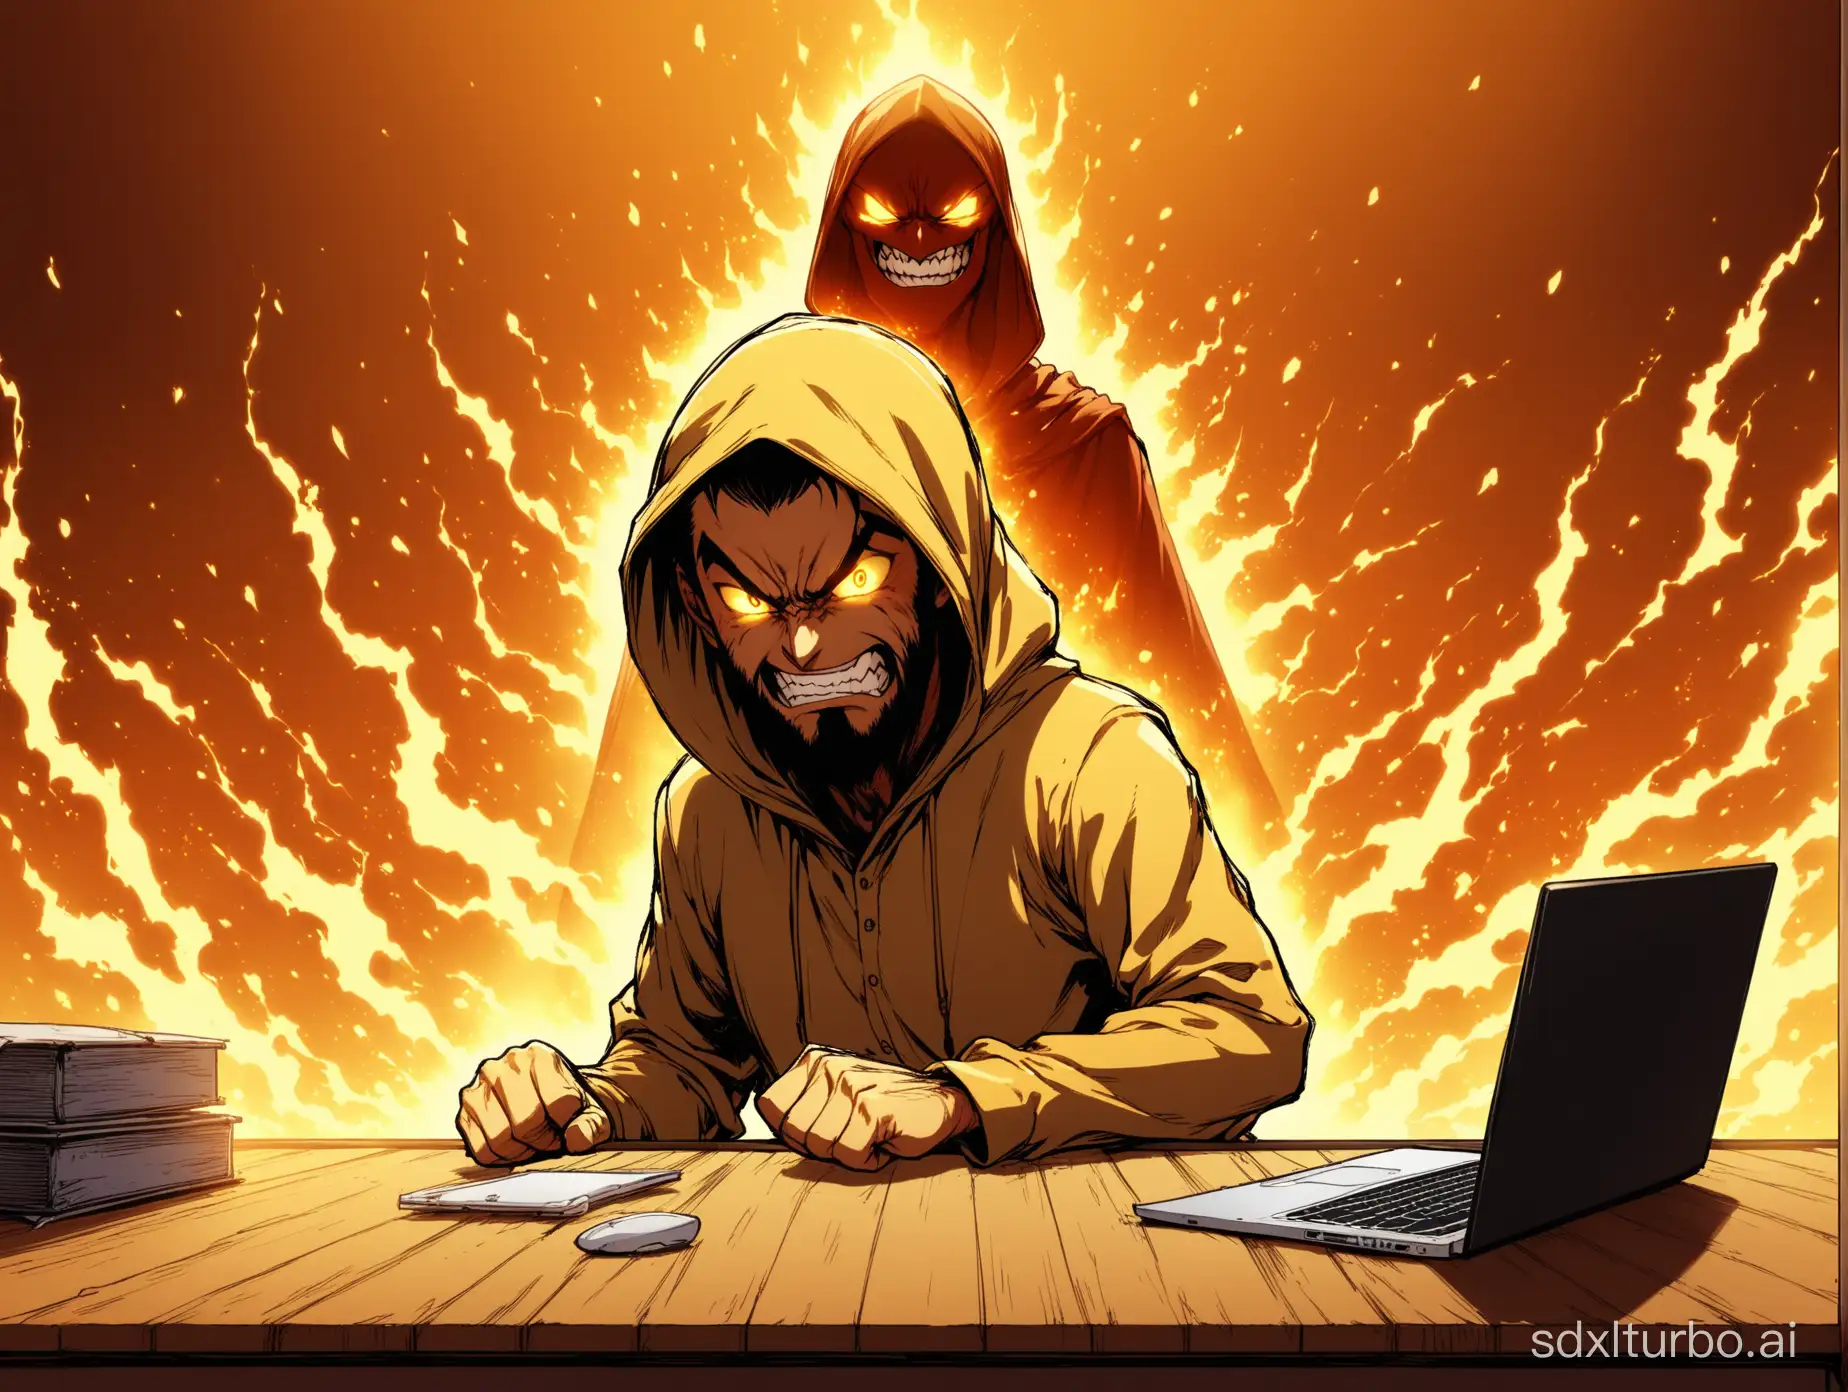 Dramatic anime: A lone Arabian man sitting in front of his laptop, eyes blazing with fury and cry, slams his fist on a desk littered with anger. Behind him, a hooded figure with a devilish grin and evil smile is watching him and enjoying his loss. Yellow glowy background.